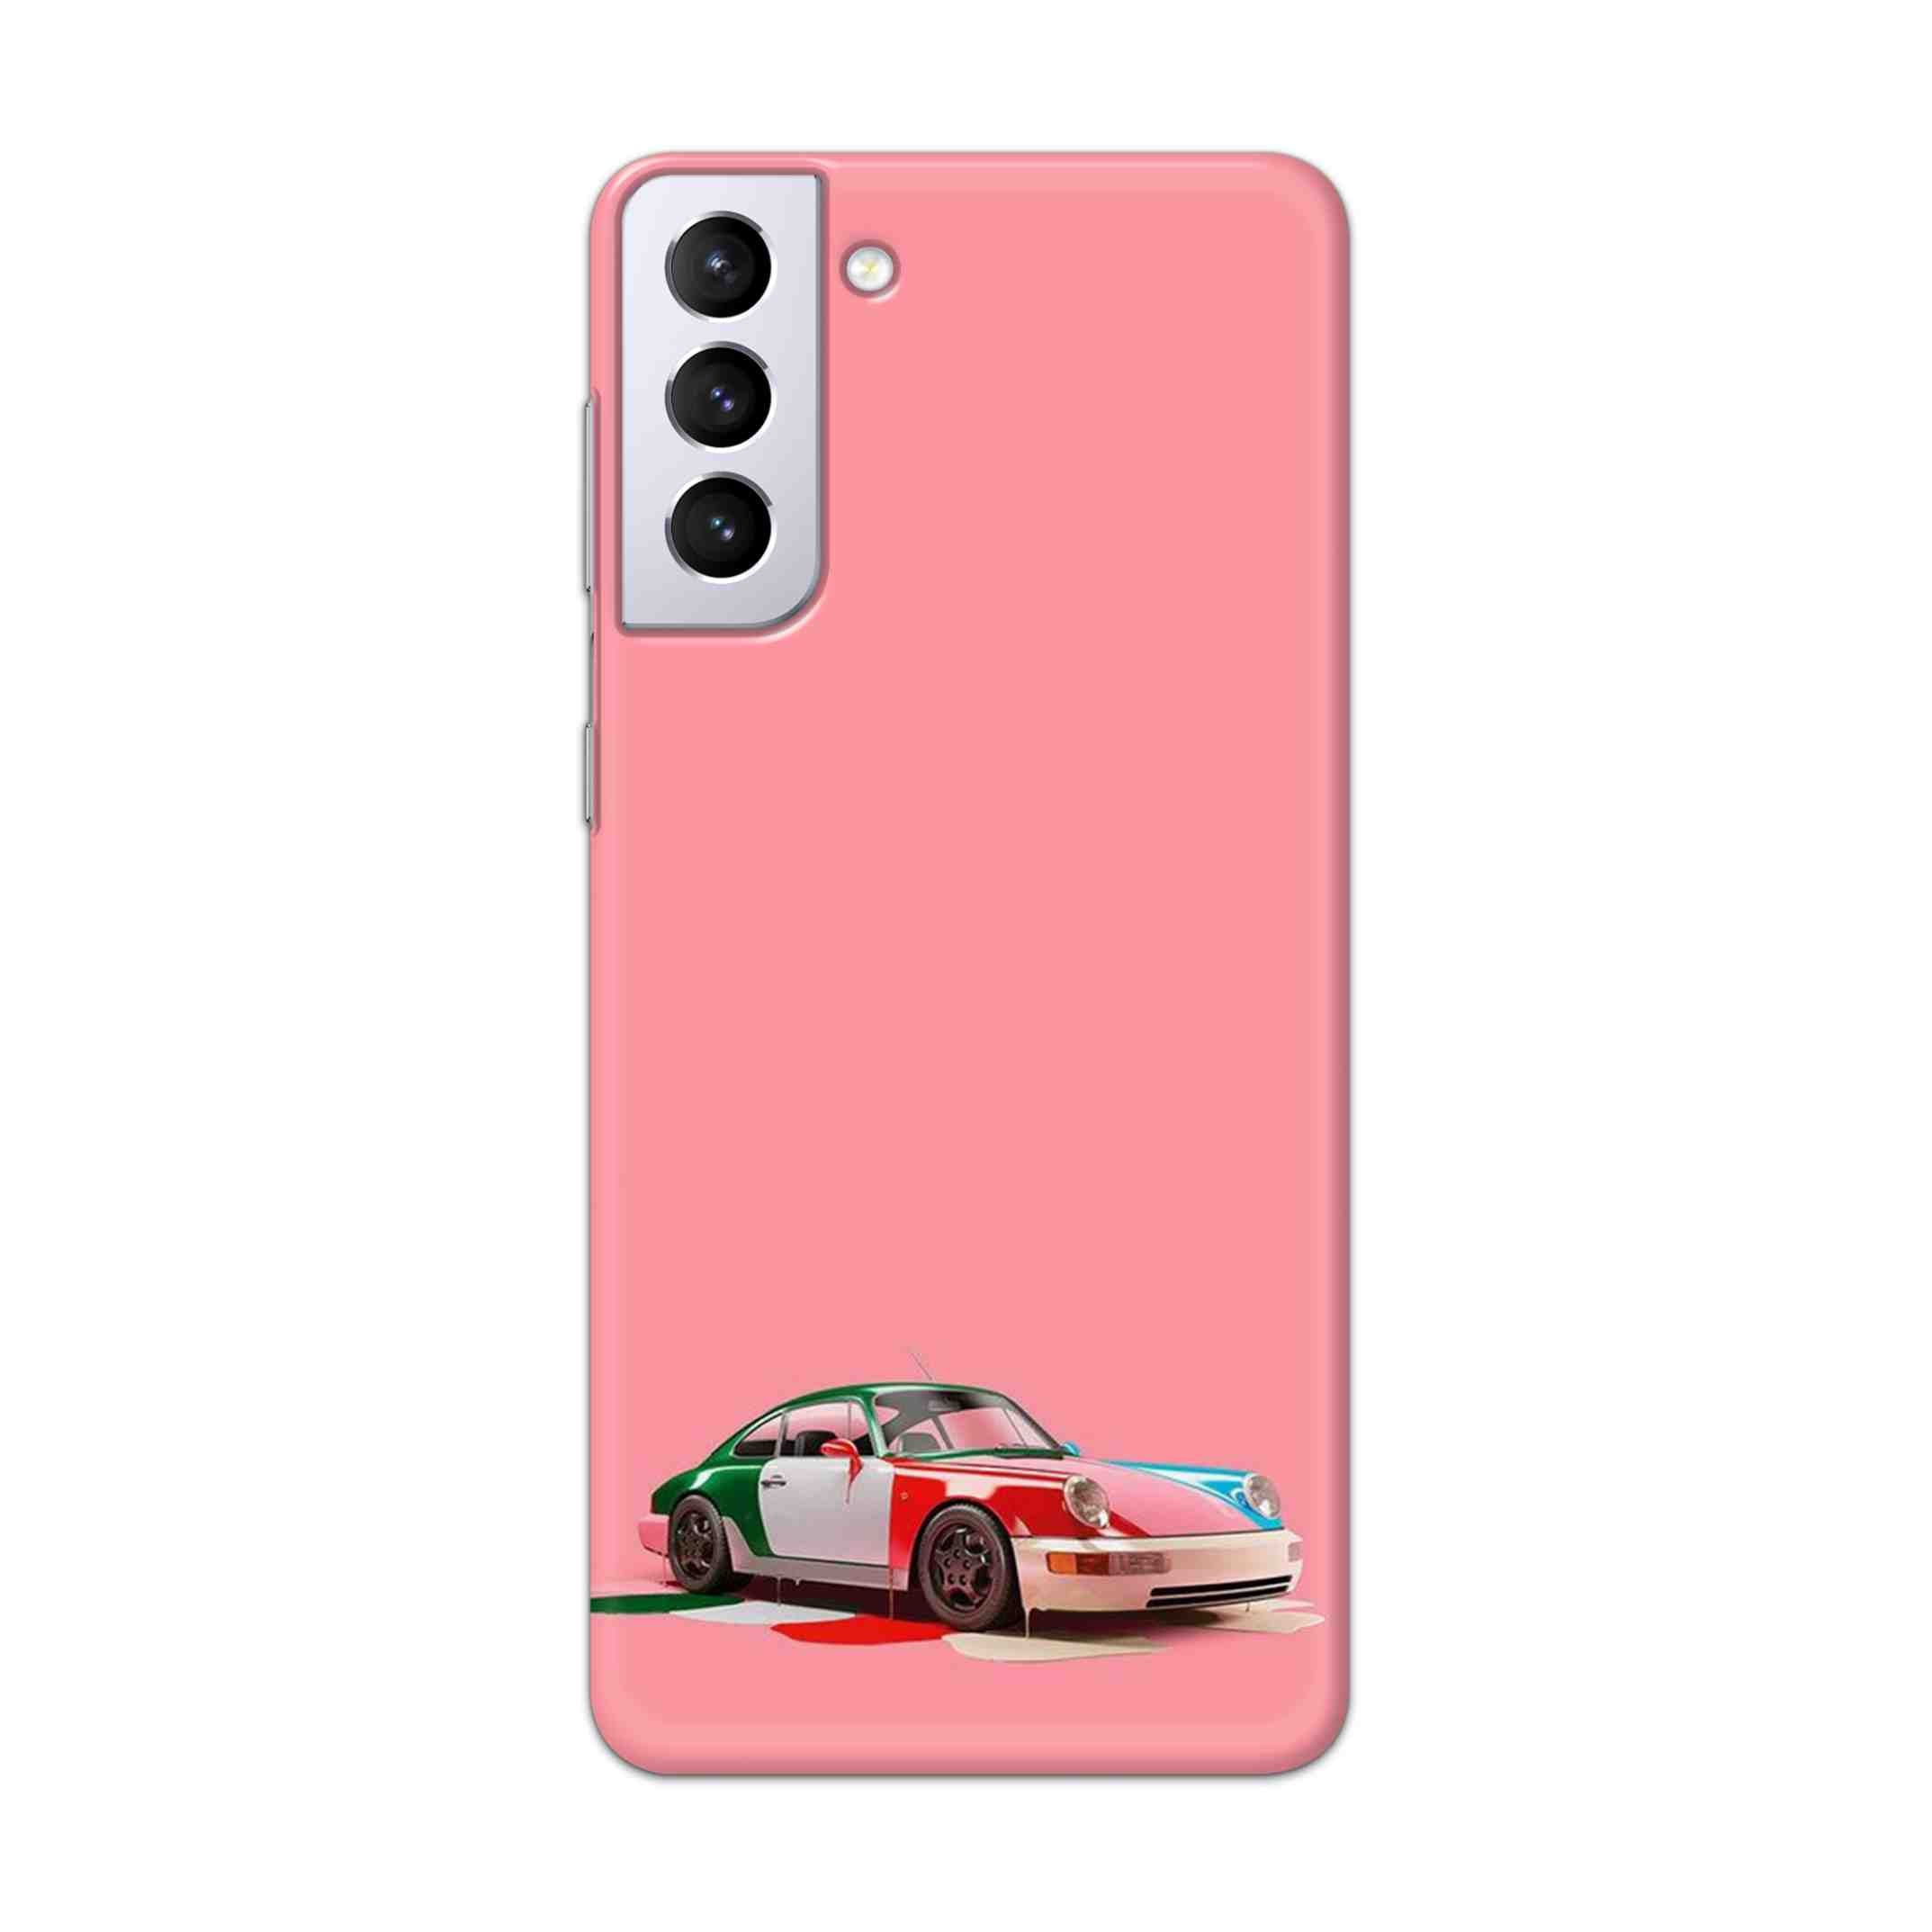 Buy Pink Porche Hard Back Mobile Phone Case Cover For Samsung Galaxy S21 Plus Online